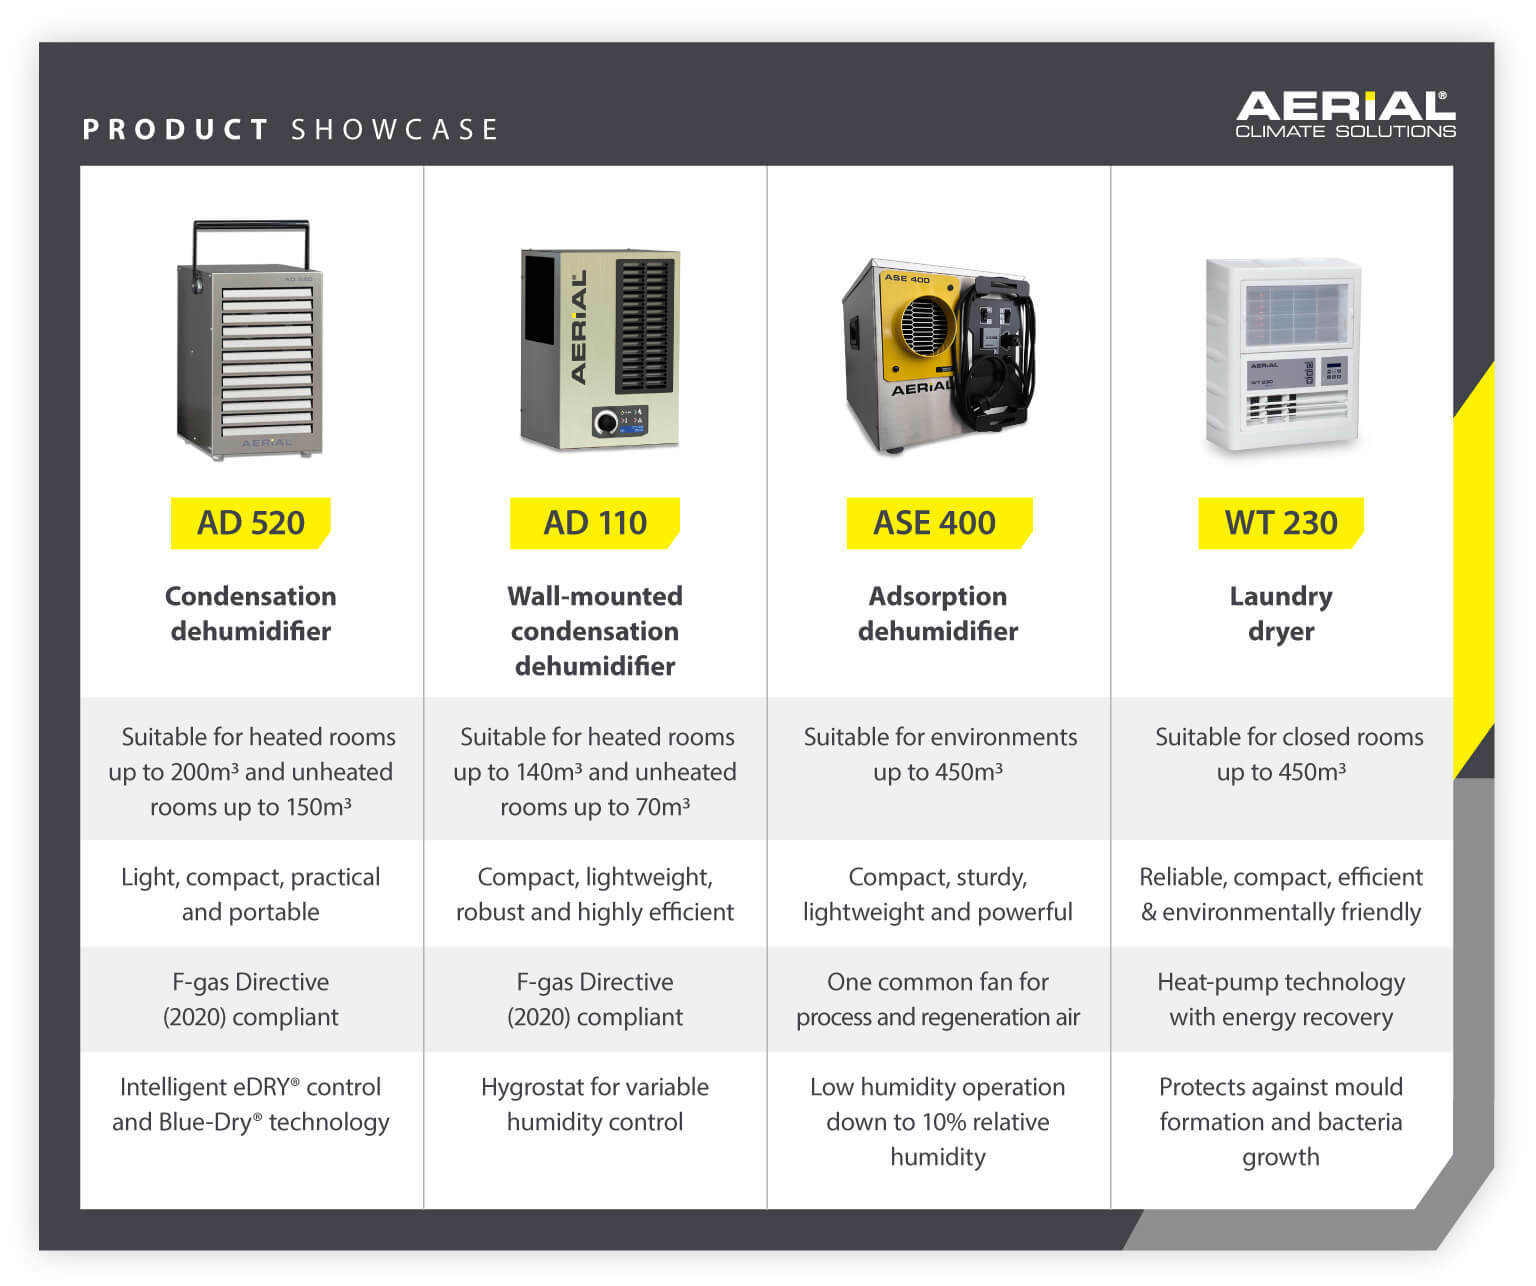 Product showcase of energy efficient Aerial commercial dehumidifiers - Infographic image